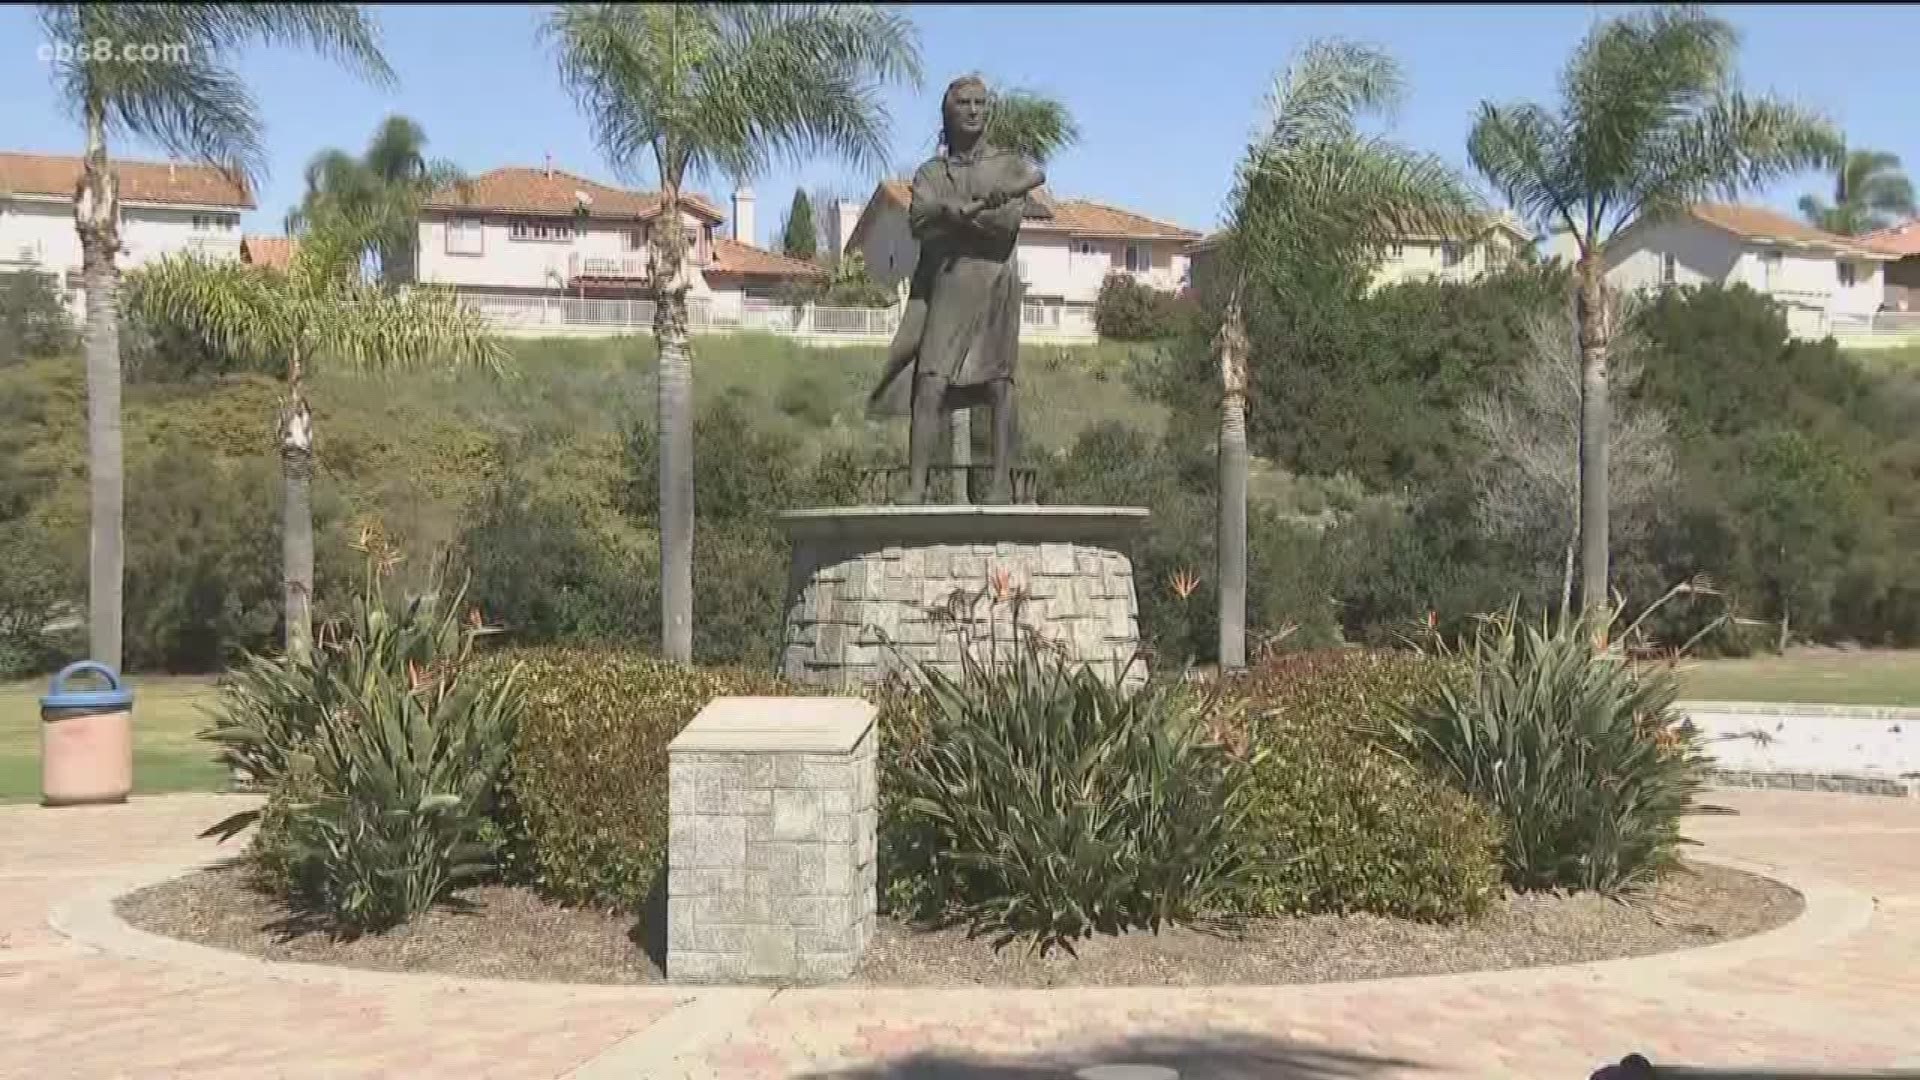 A Chula Vista City Council Committee will discuss removing the Christopher Columbus statue at Discovery Park Thursday.